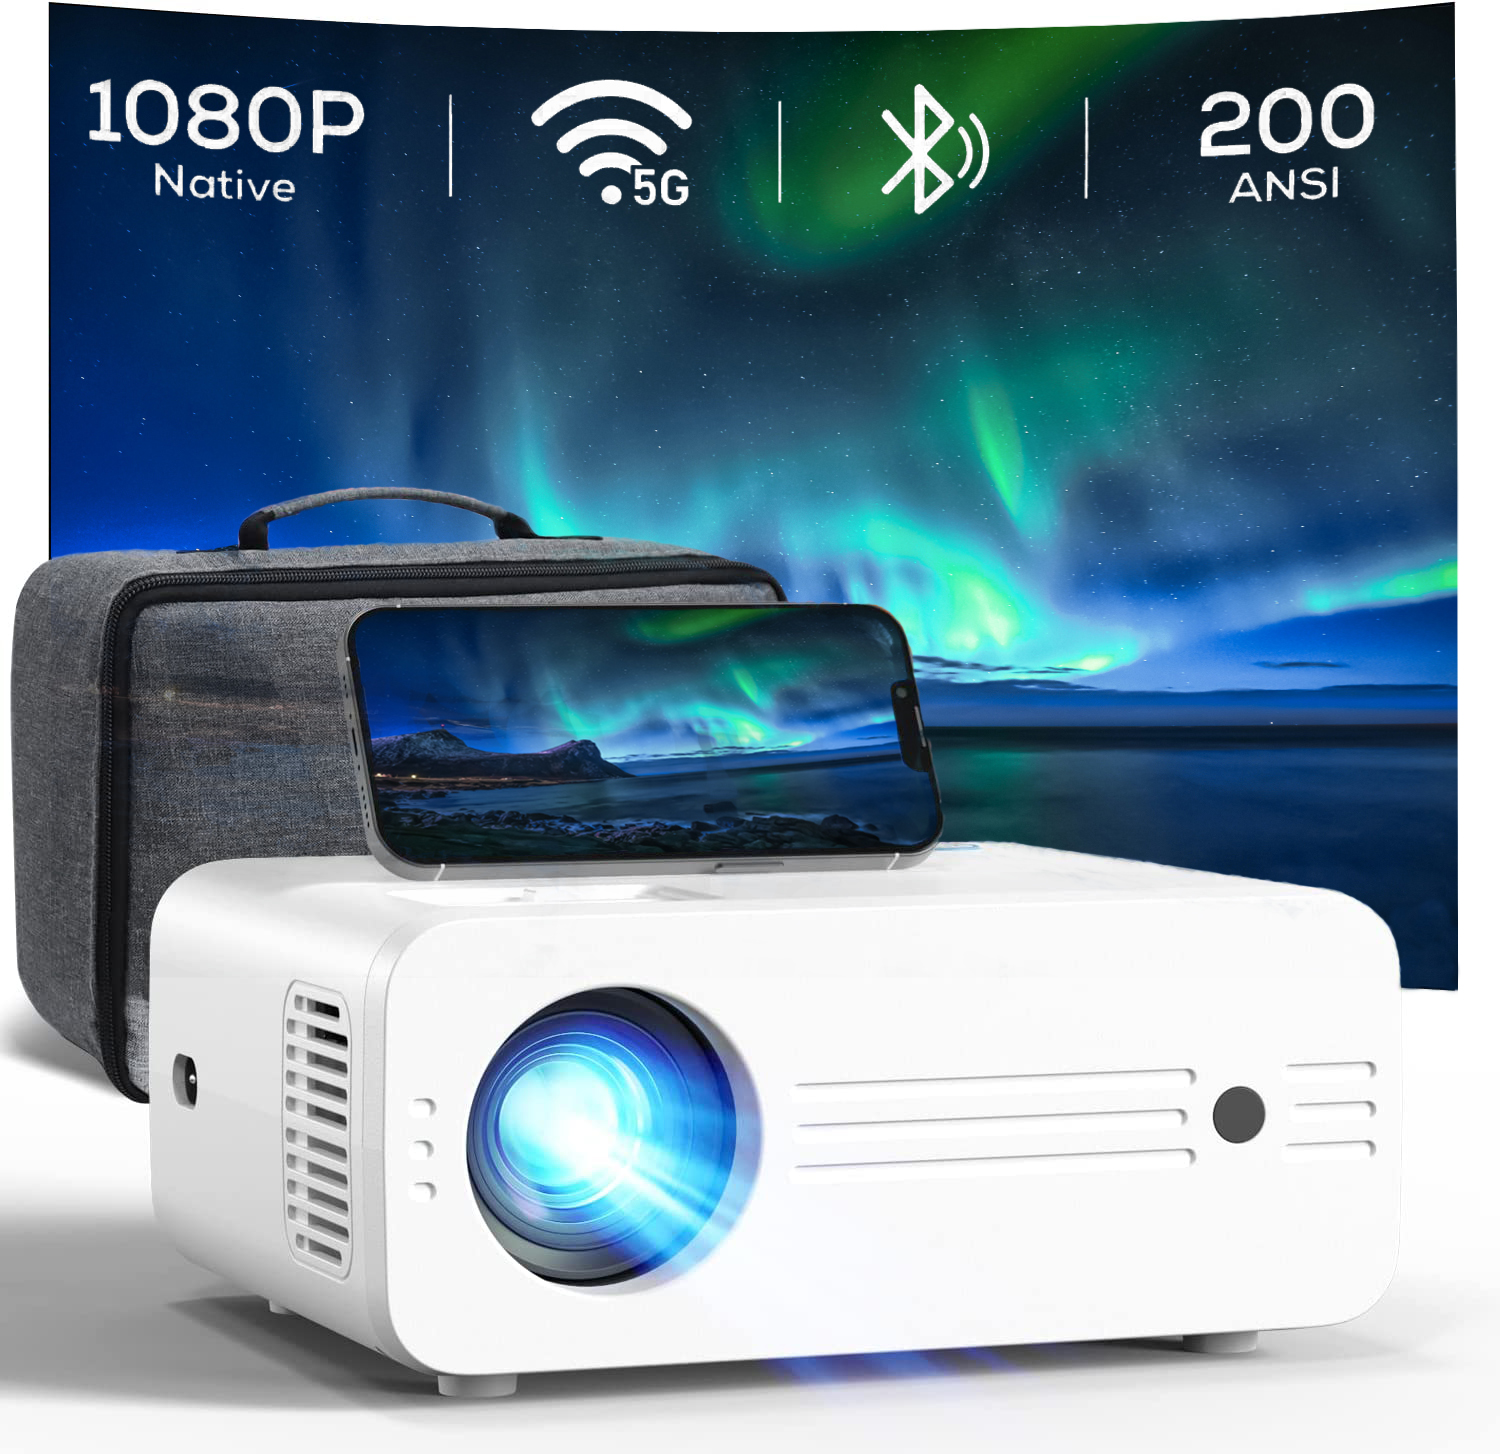 iZEEKER 4K Projectors with 5G wifi and Bluetooth ,Native 1080P Projection,9000 Lumens,with Carry Bag - image 1 of 7